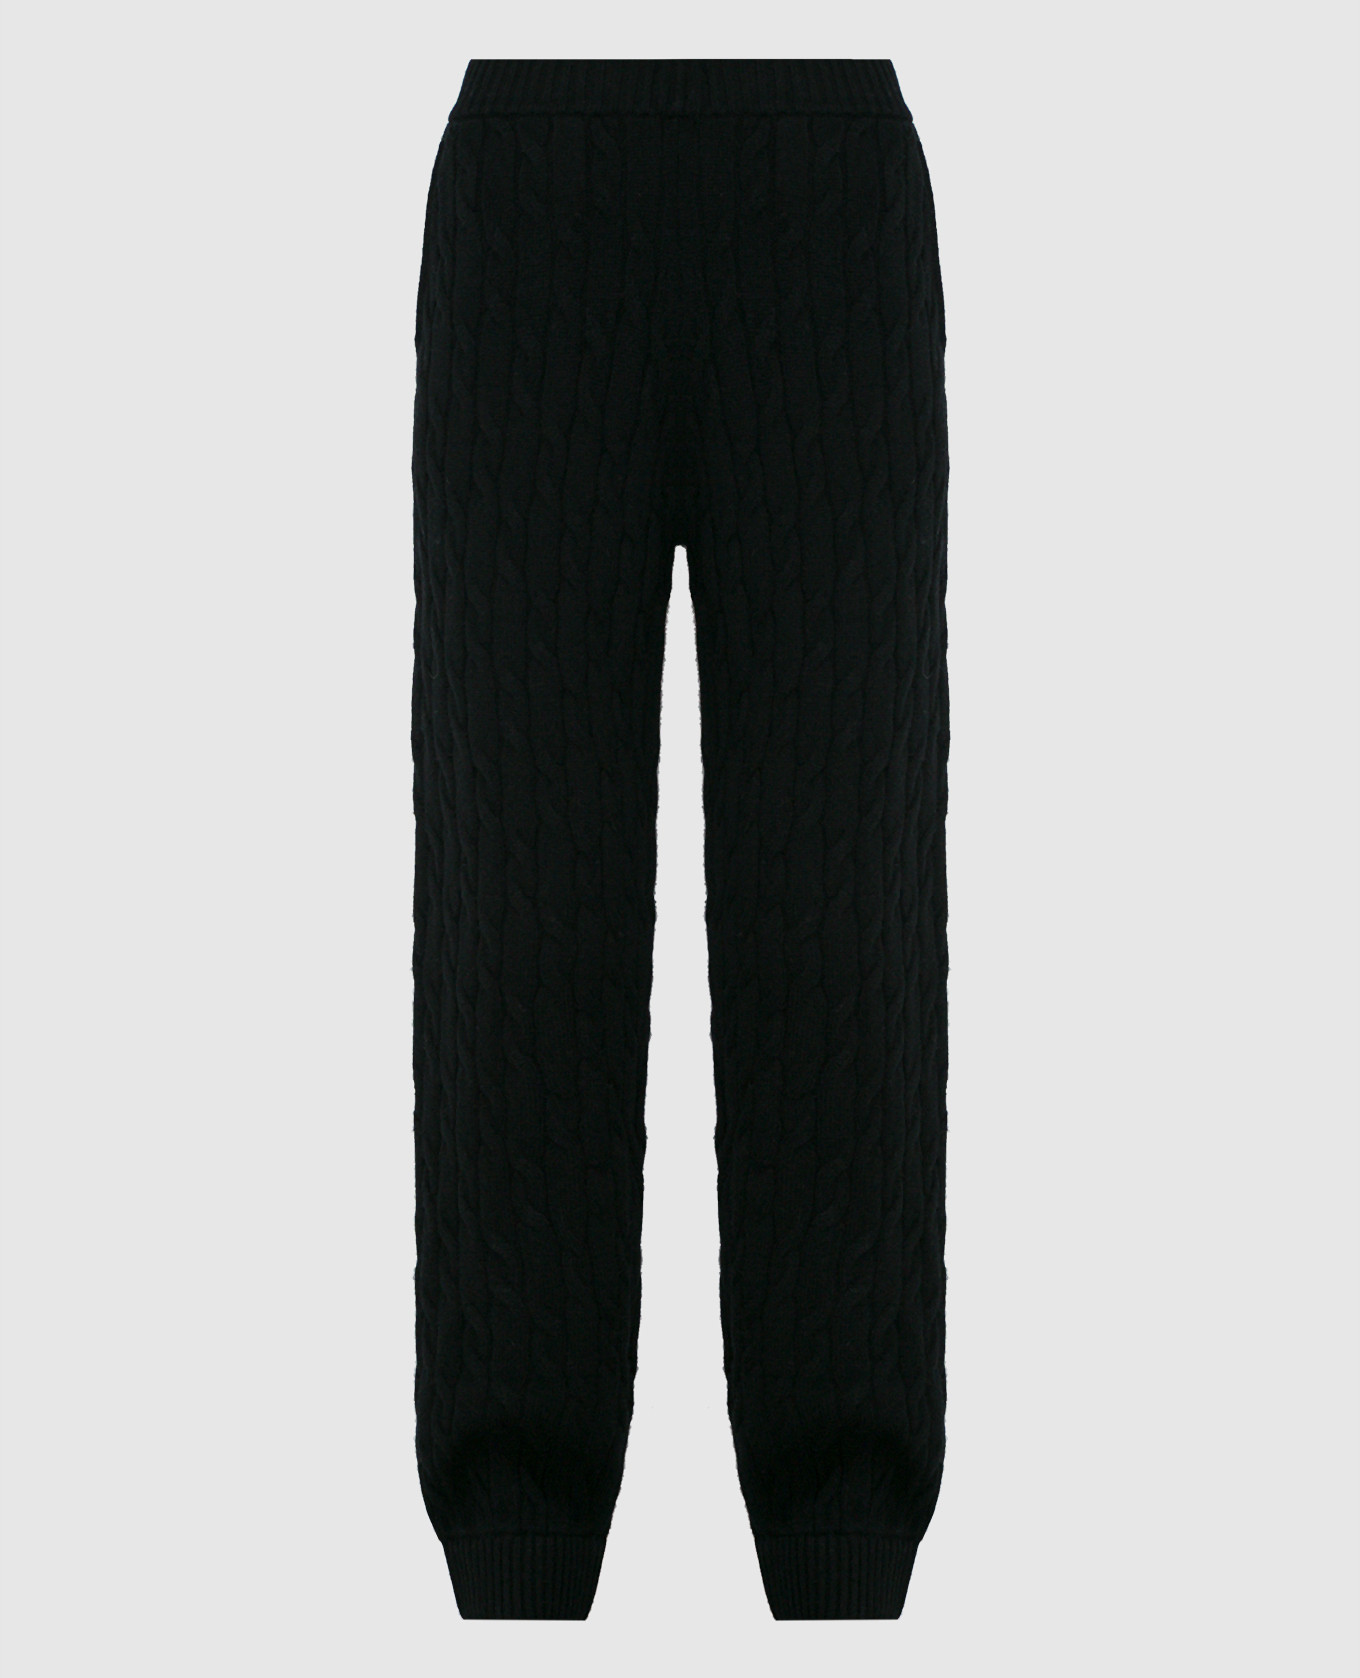 Black joggers made of wool in a textured pattern